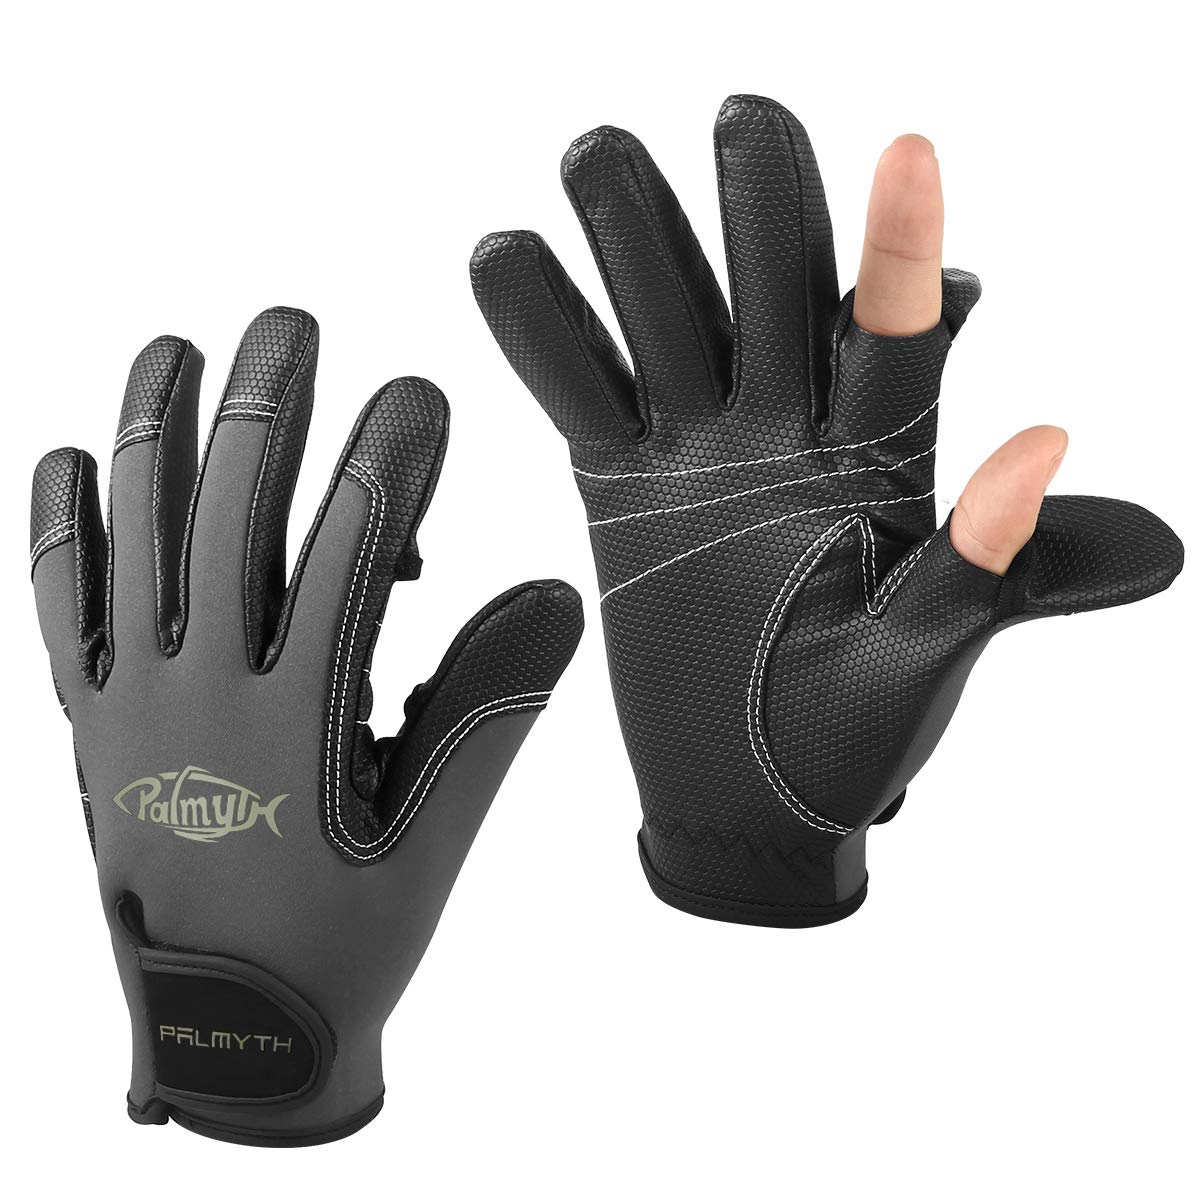 Palmyth Neoprene Fishing Gloves for Men and Women 2 Cut Fingers Flexible  Great for Photography Fly